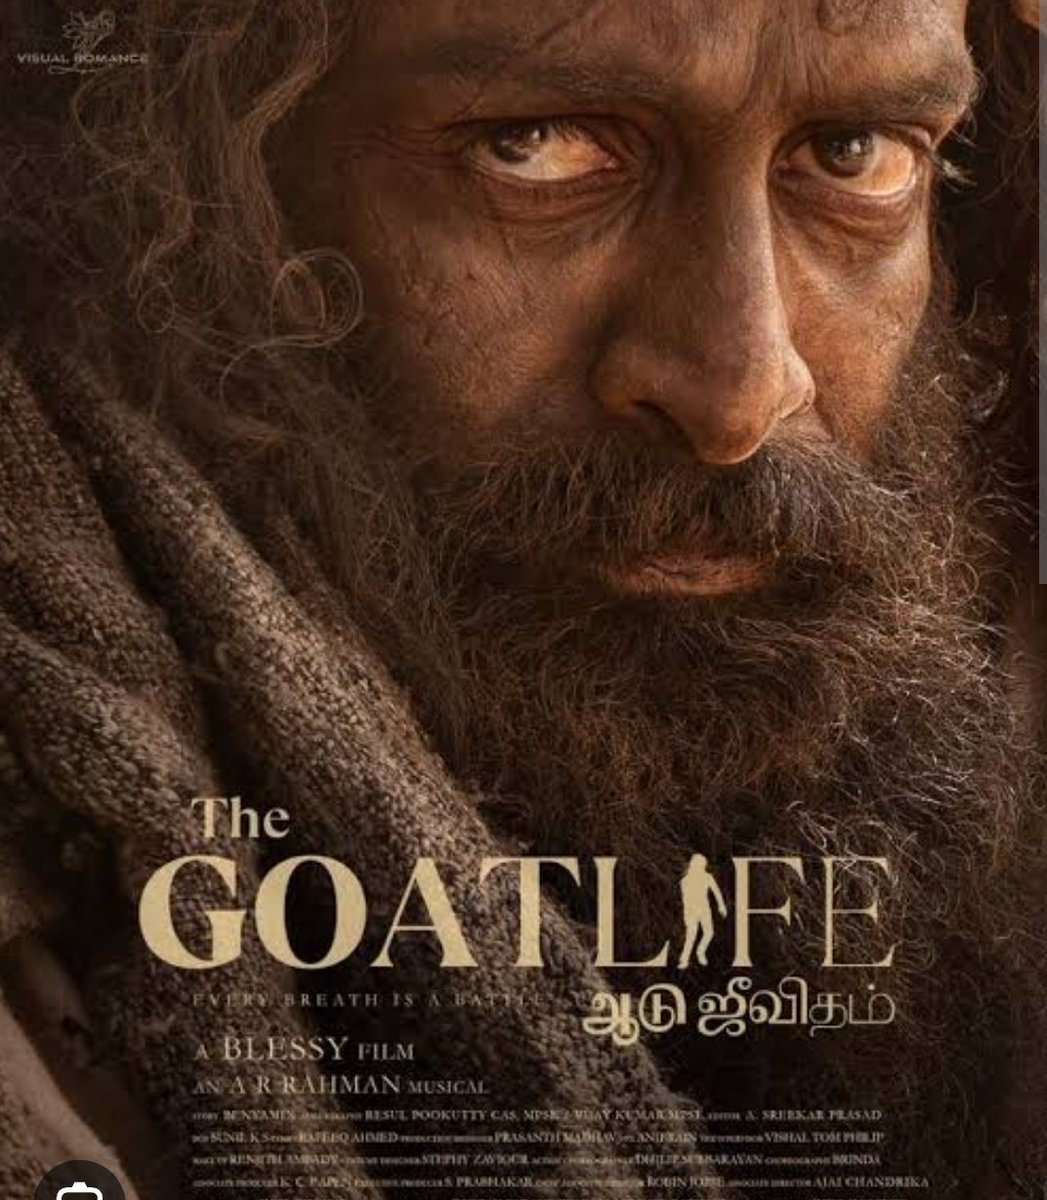 #Goatlife #Aadujeevitham - will go #Oscars @PrithviOfficial @DirectorBlessy

Must watch what a performance man amazed. What a transformation. What a visualation. @PrithviOfficial nothing bigger than this for you to prove. What a performance brother. 'Only felt when will Naajeb's